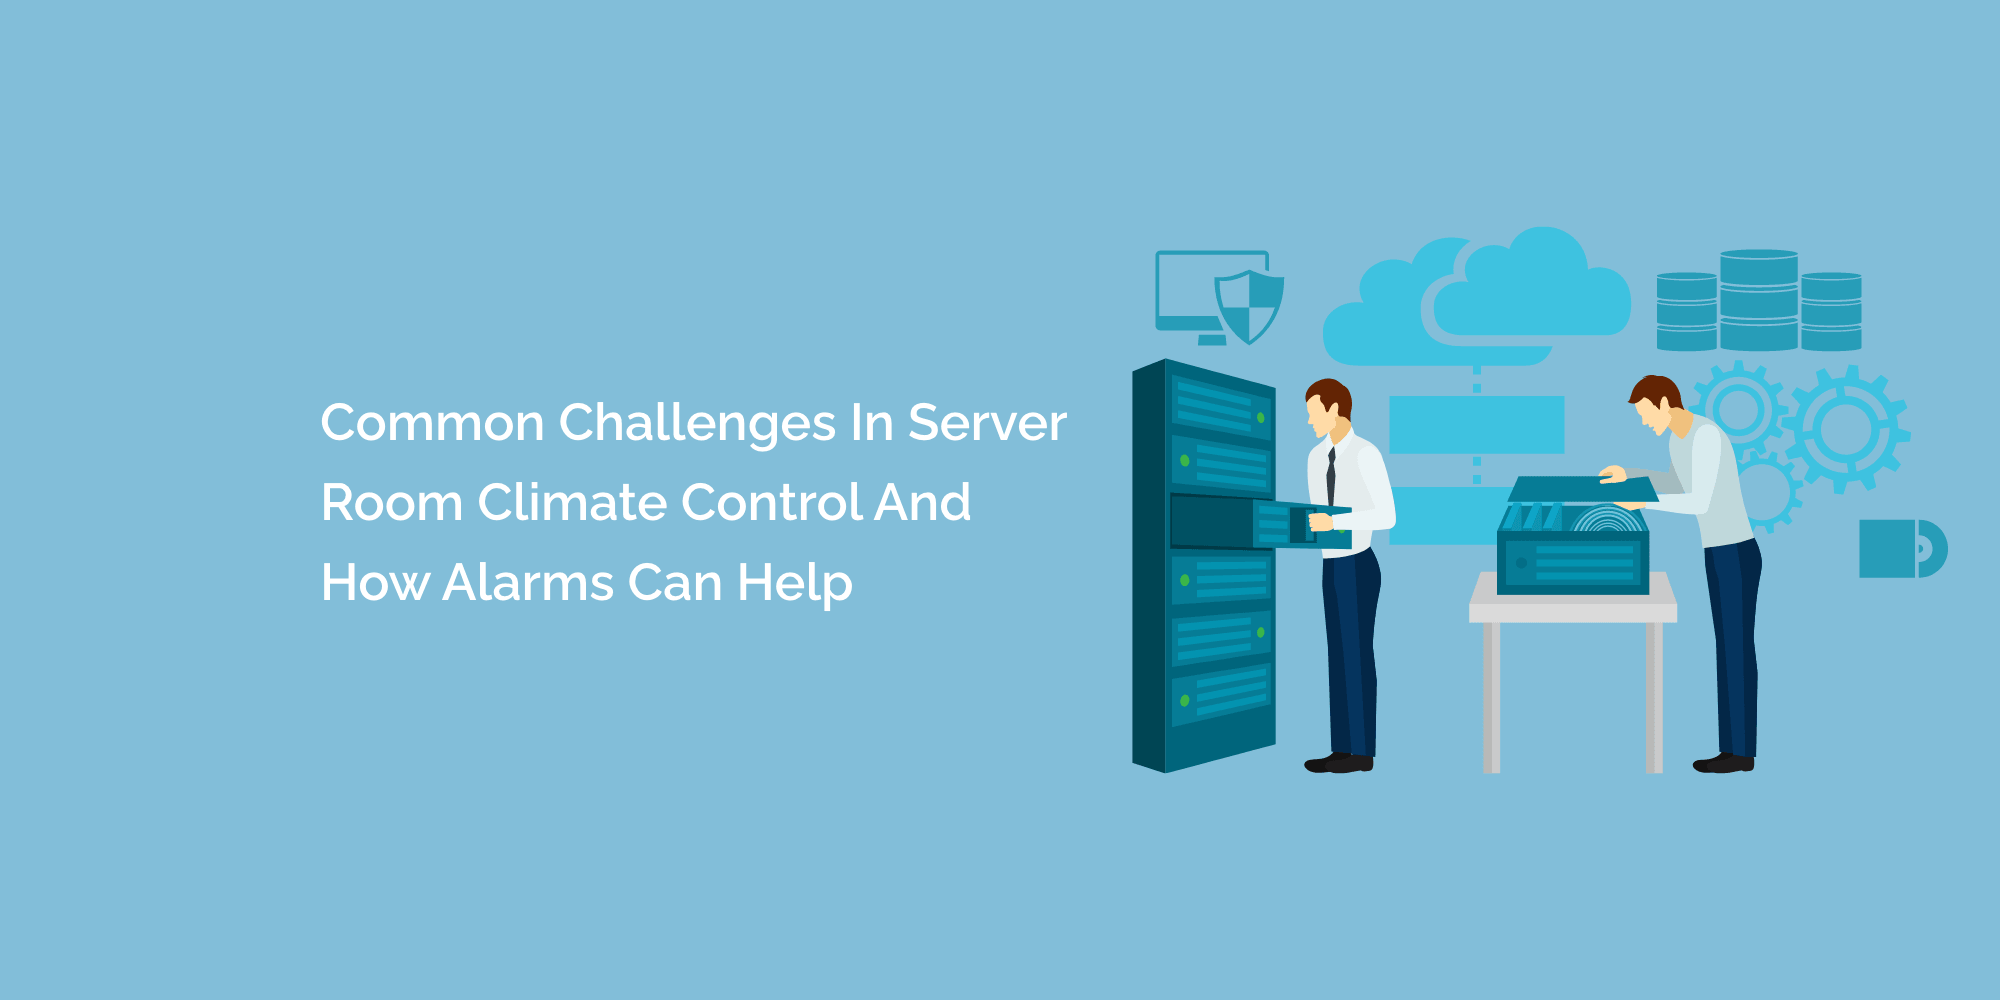 Common Challenges in Server Room Climate Control and How Alarms Can Help